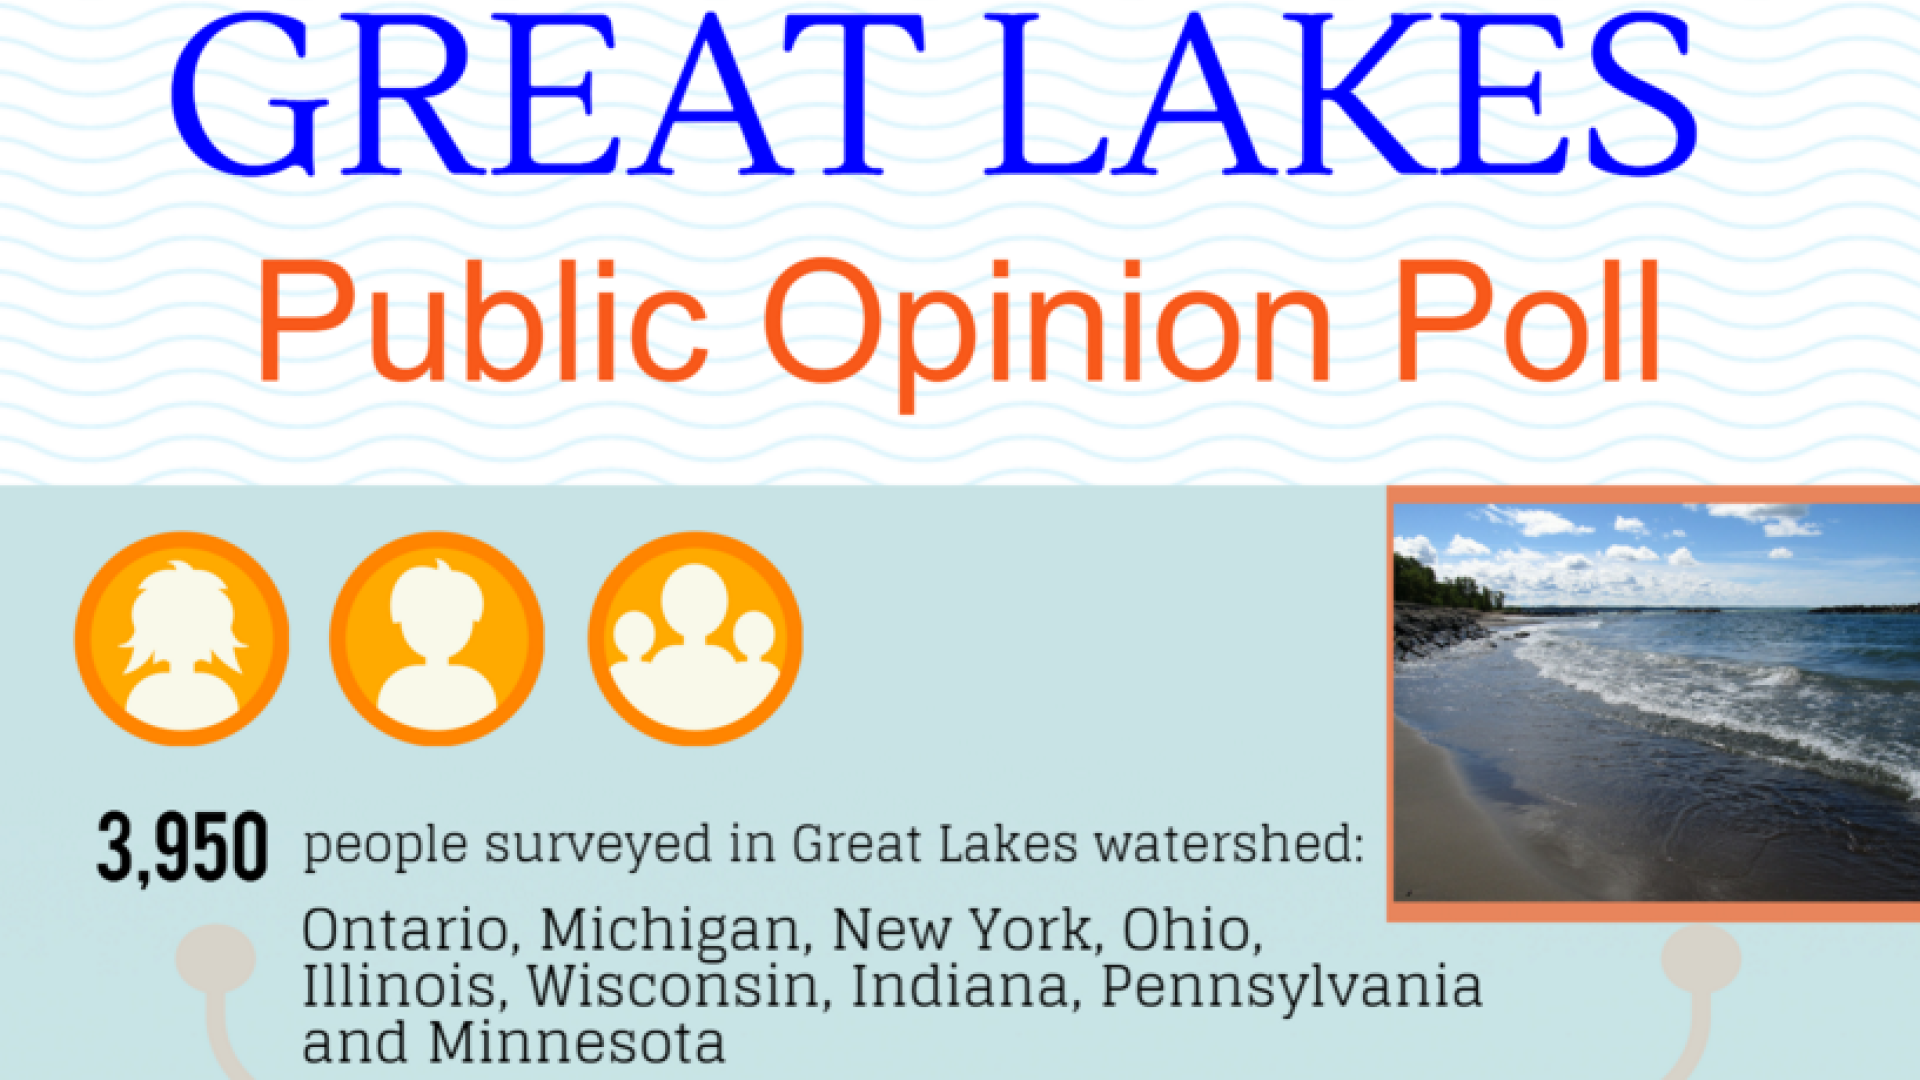 An infographic summarizing highlights of the Great Lakes poll.